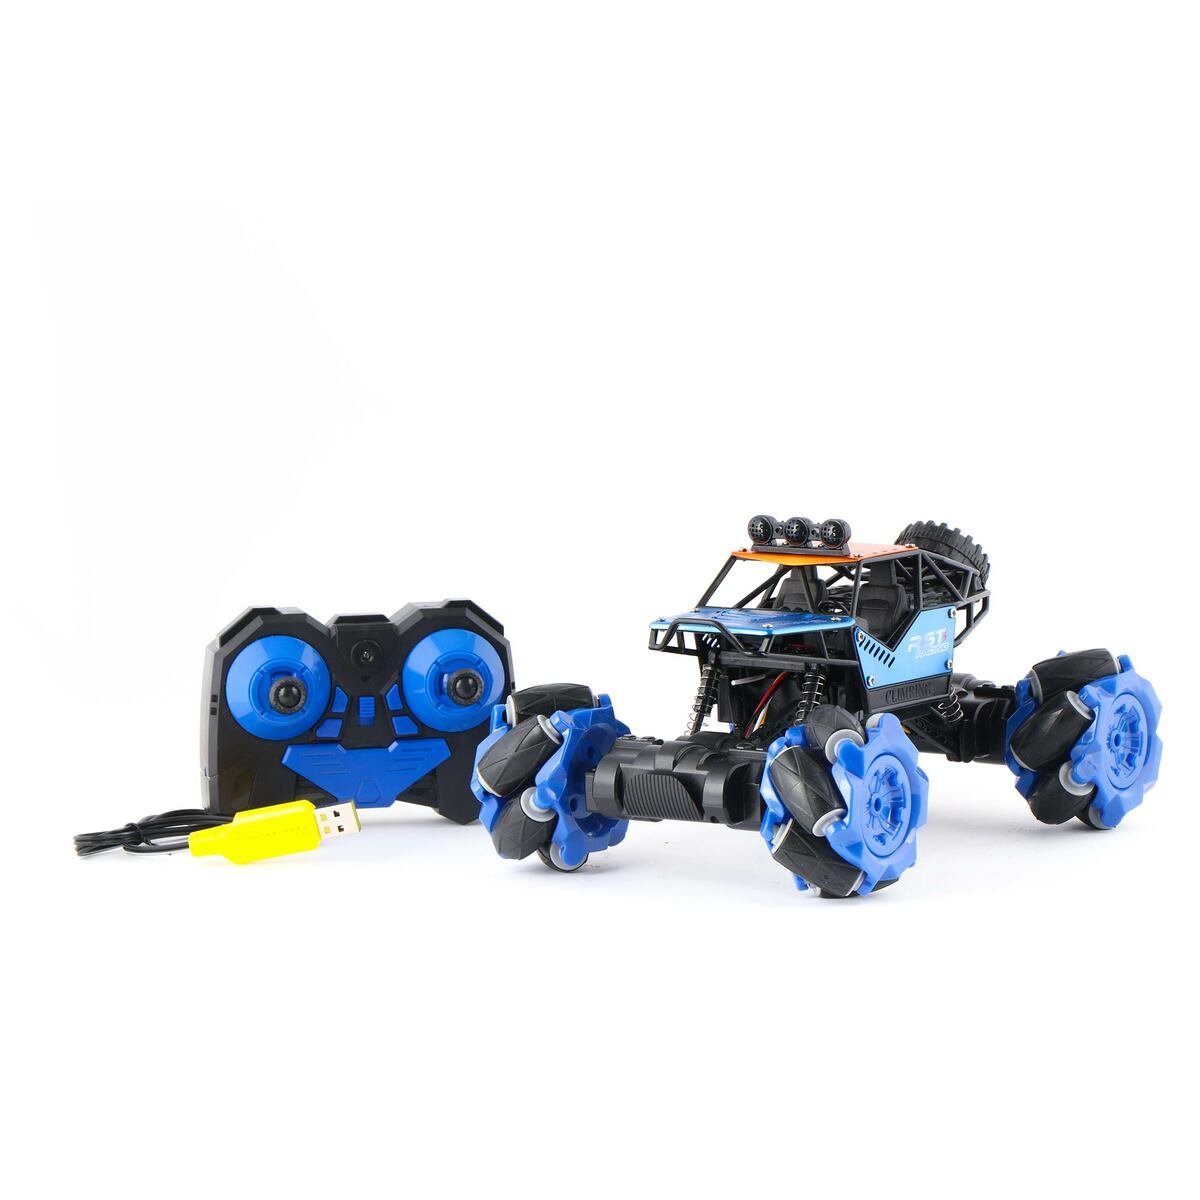 Skid Fusion Rechargeable Climbing Car 1:18 LHC015